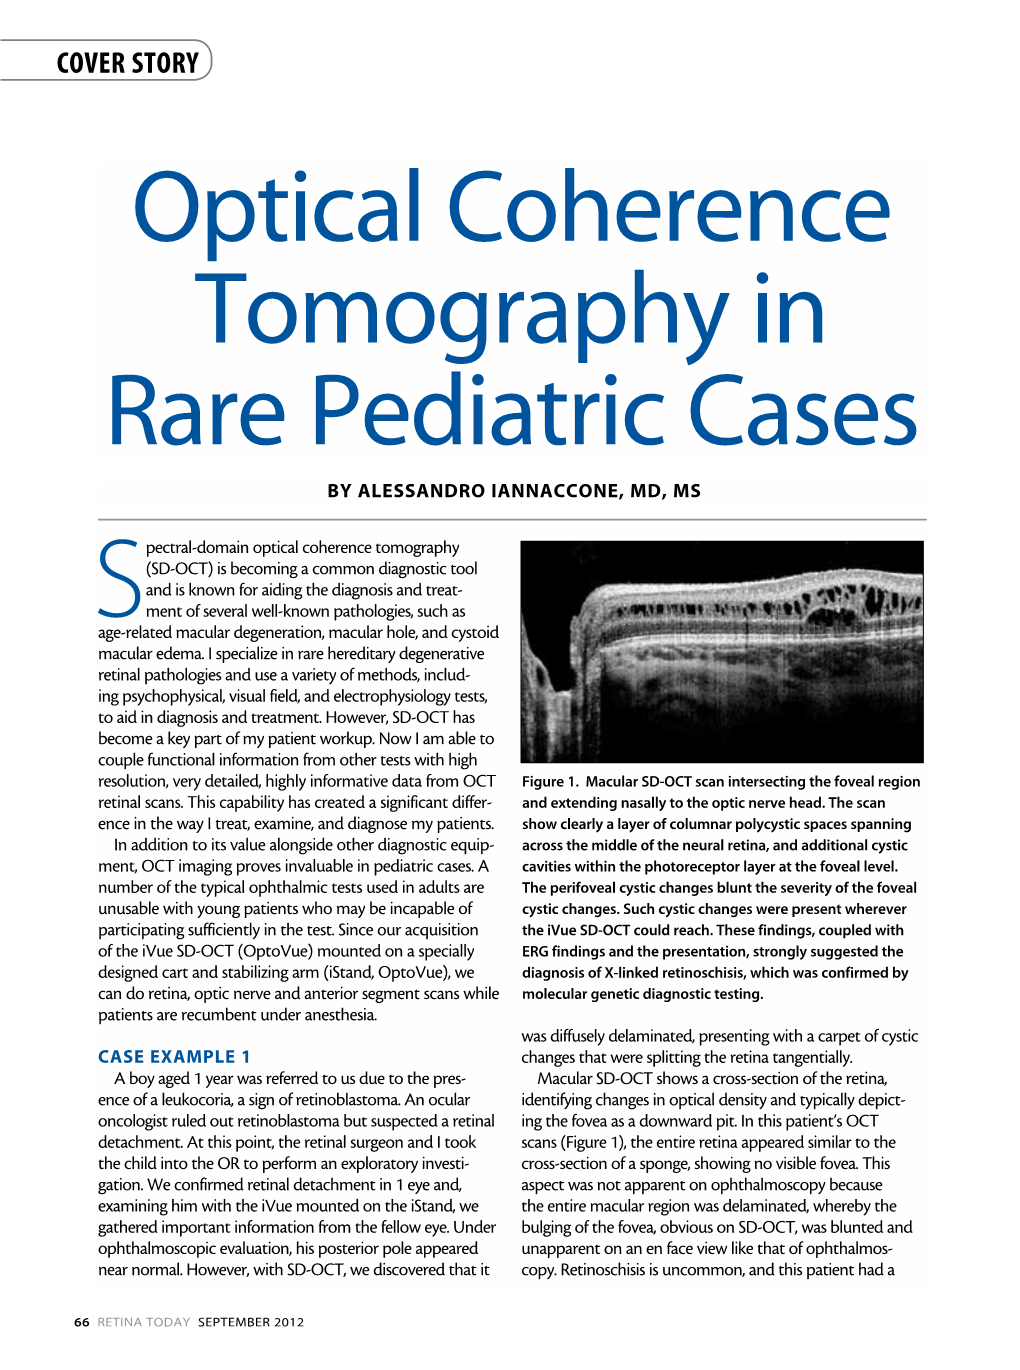 Optical Coherence Tomography in Rare Pediatric Cases by Alessandro Iannaccone, MD, MS